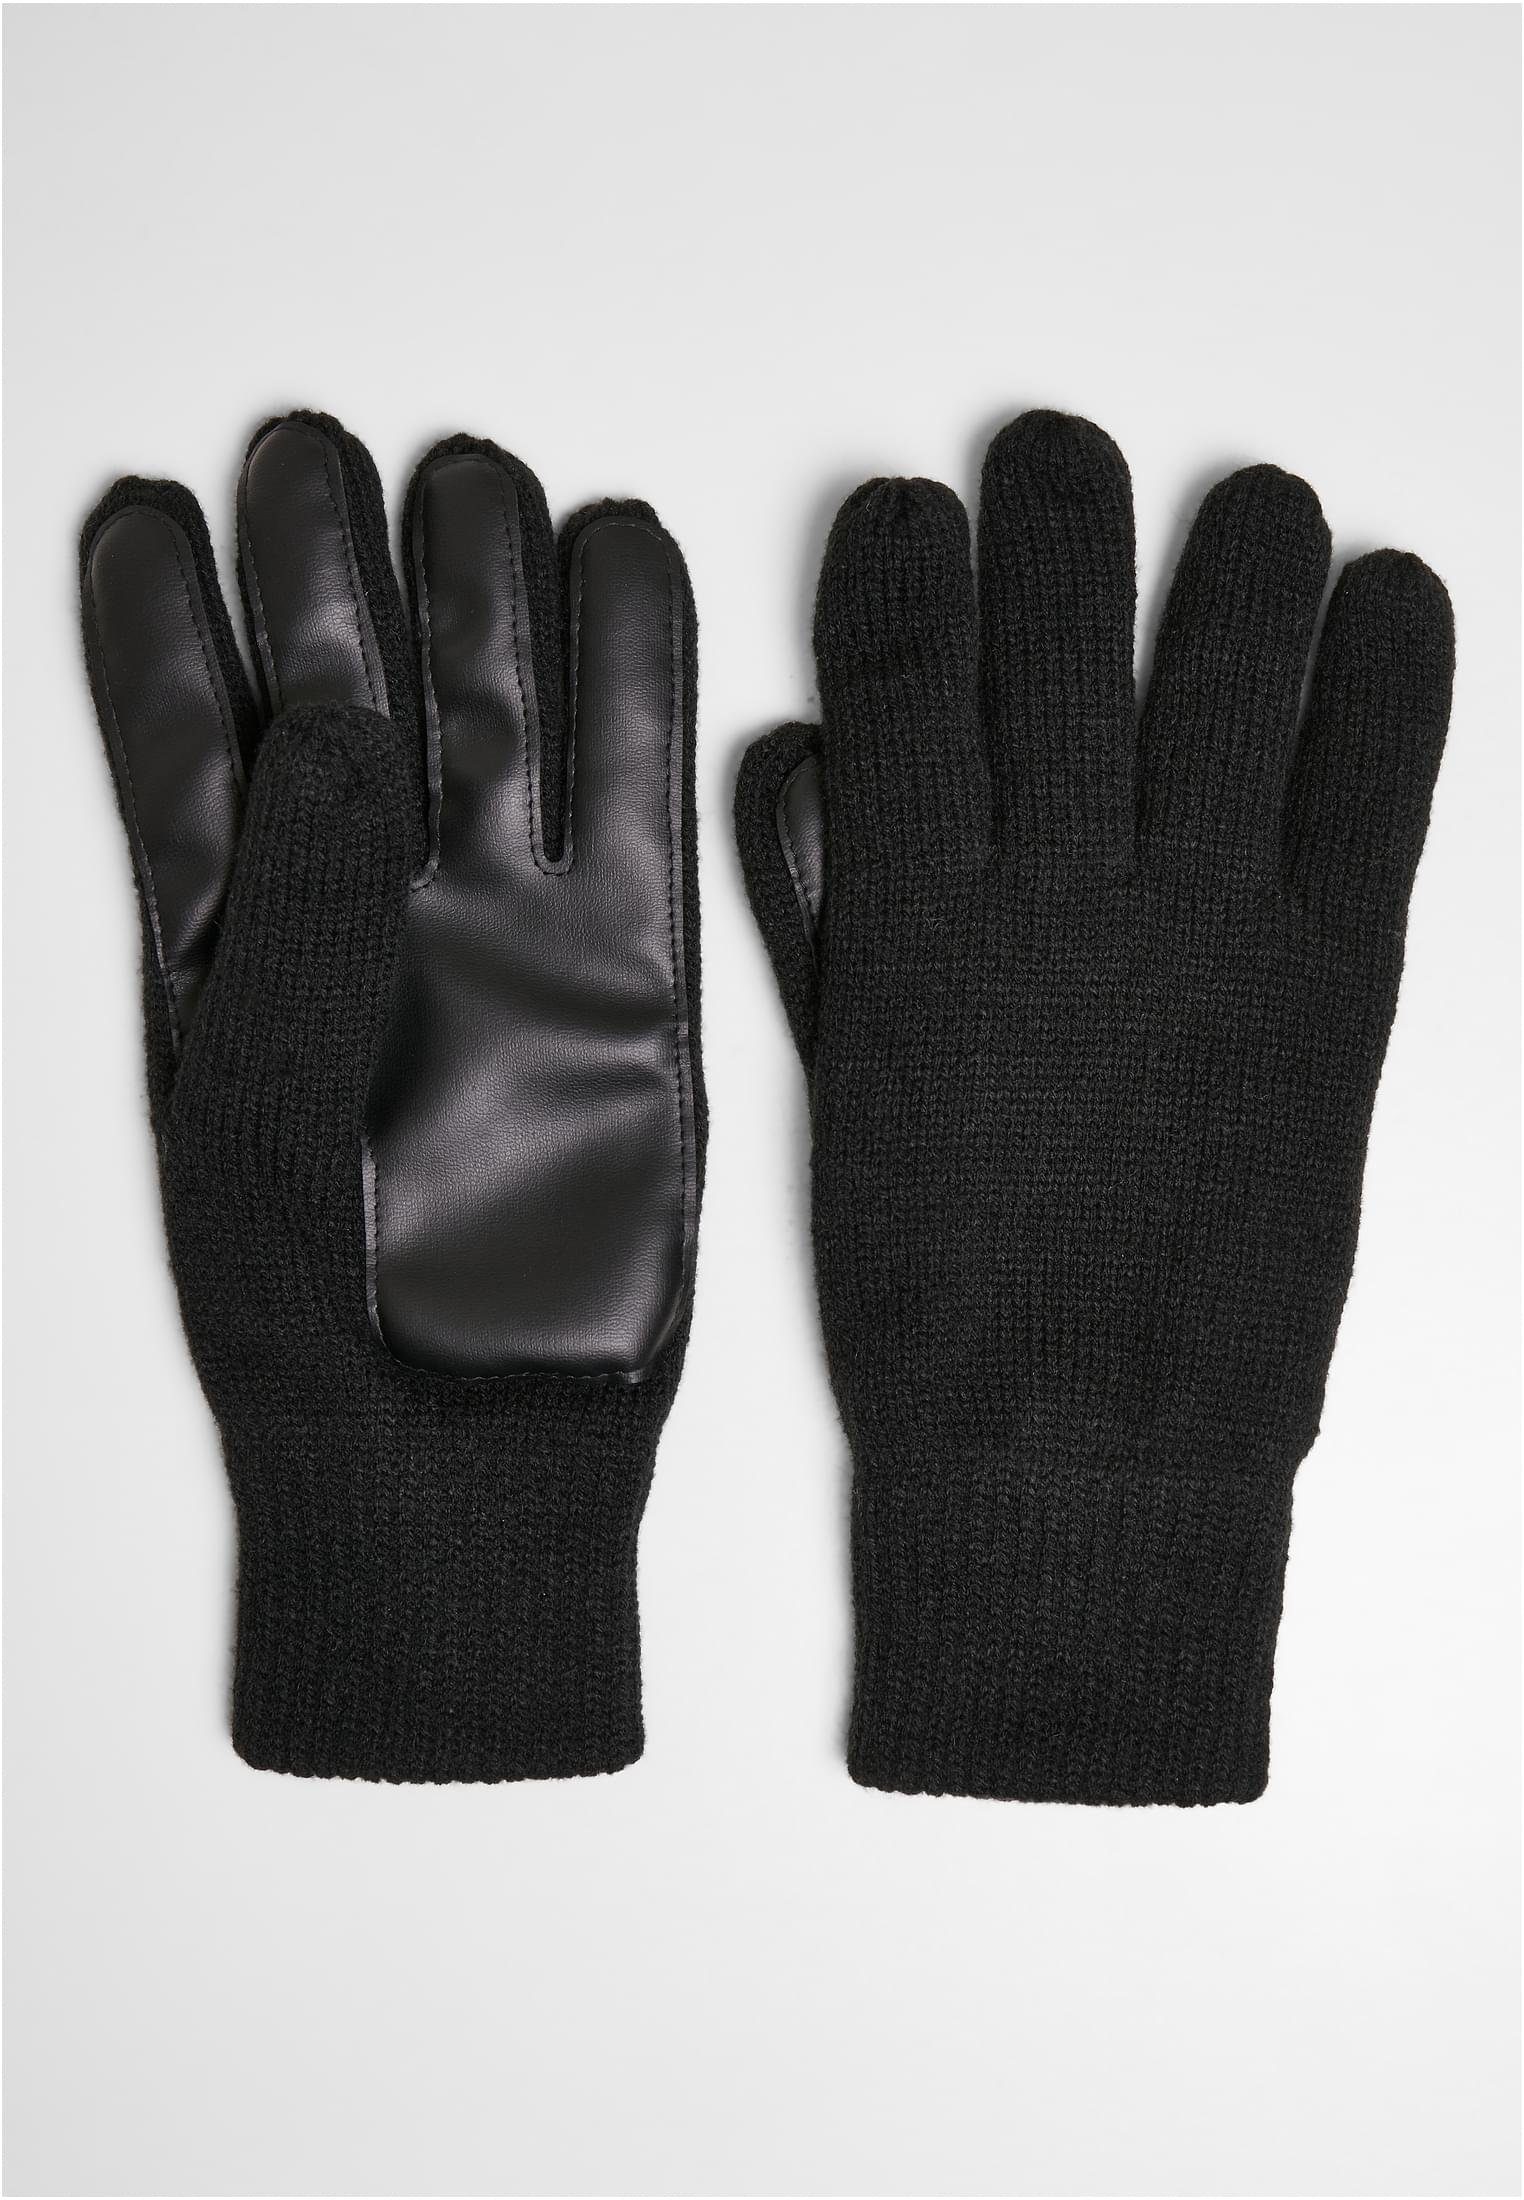 Gloves URBAN Unisex Knit Baumwollhandschuhe CLASSICS Synthetic Leather